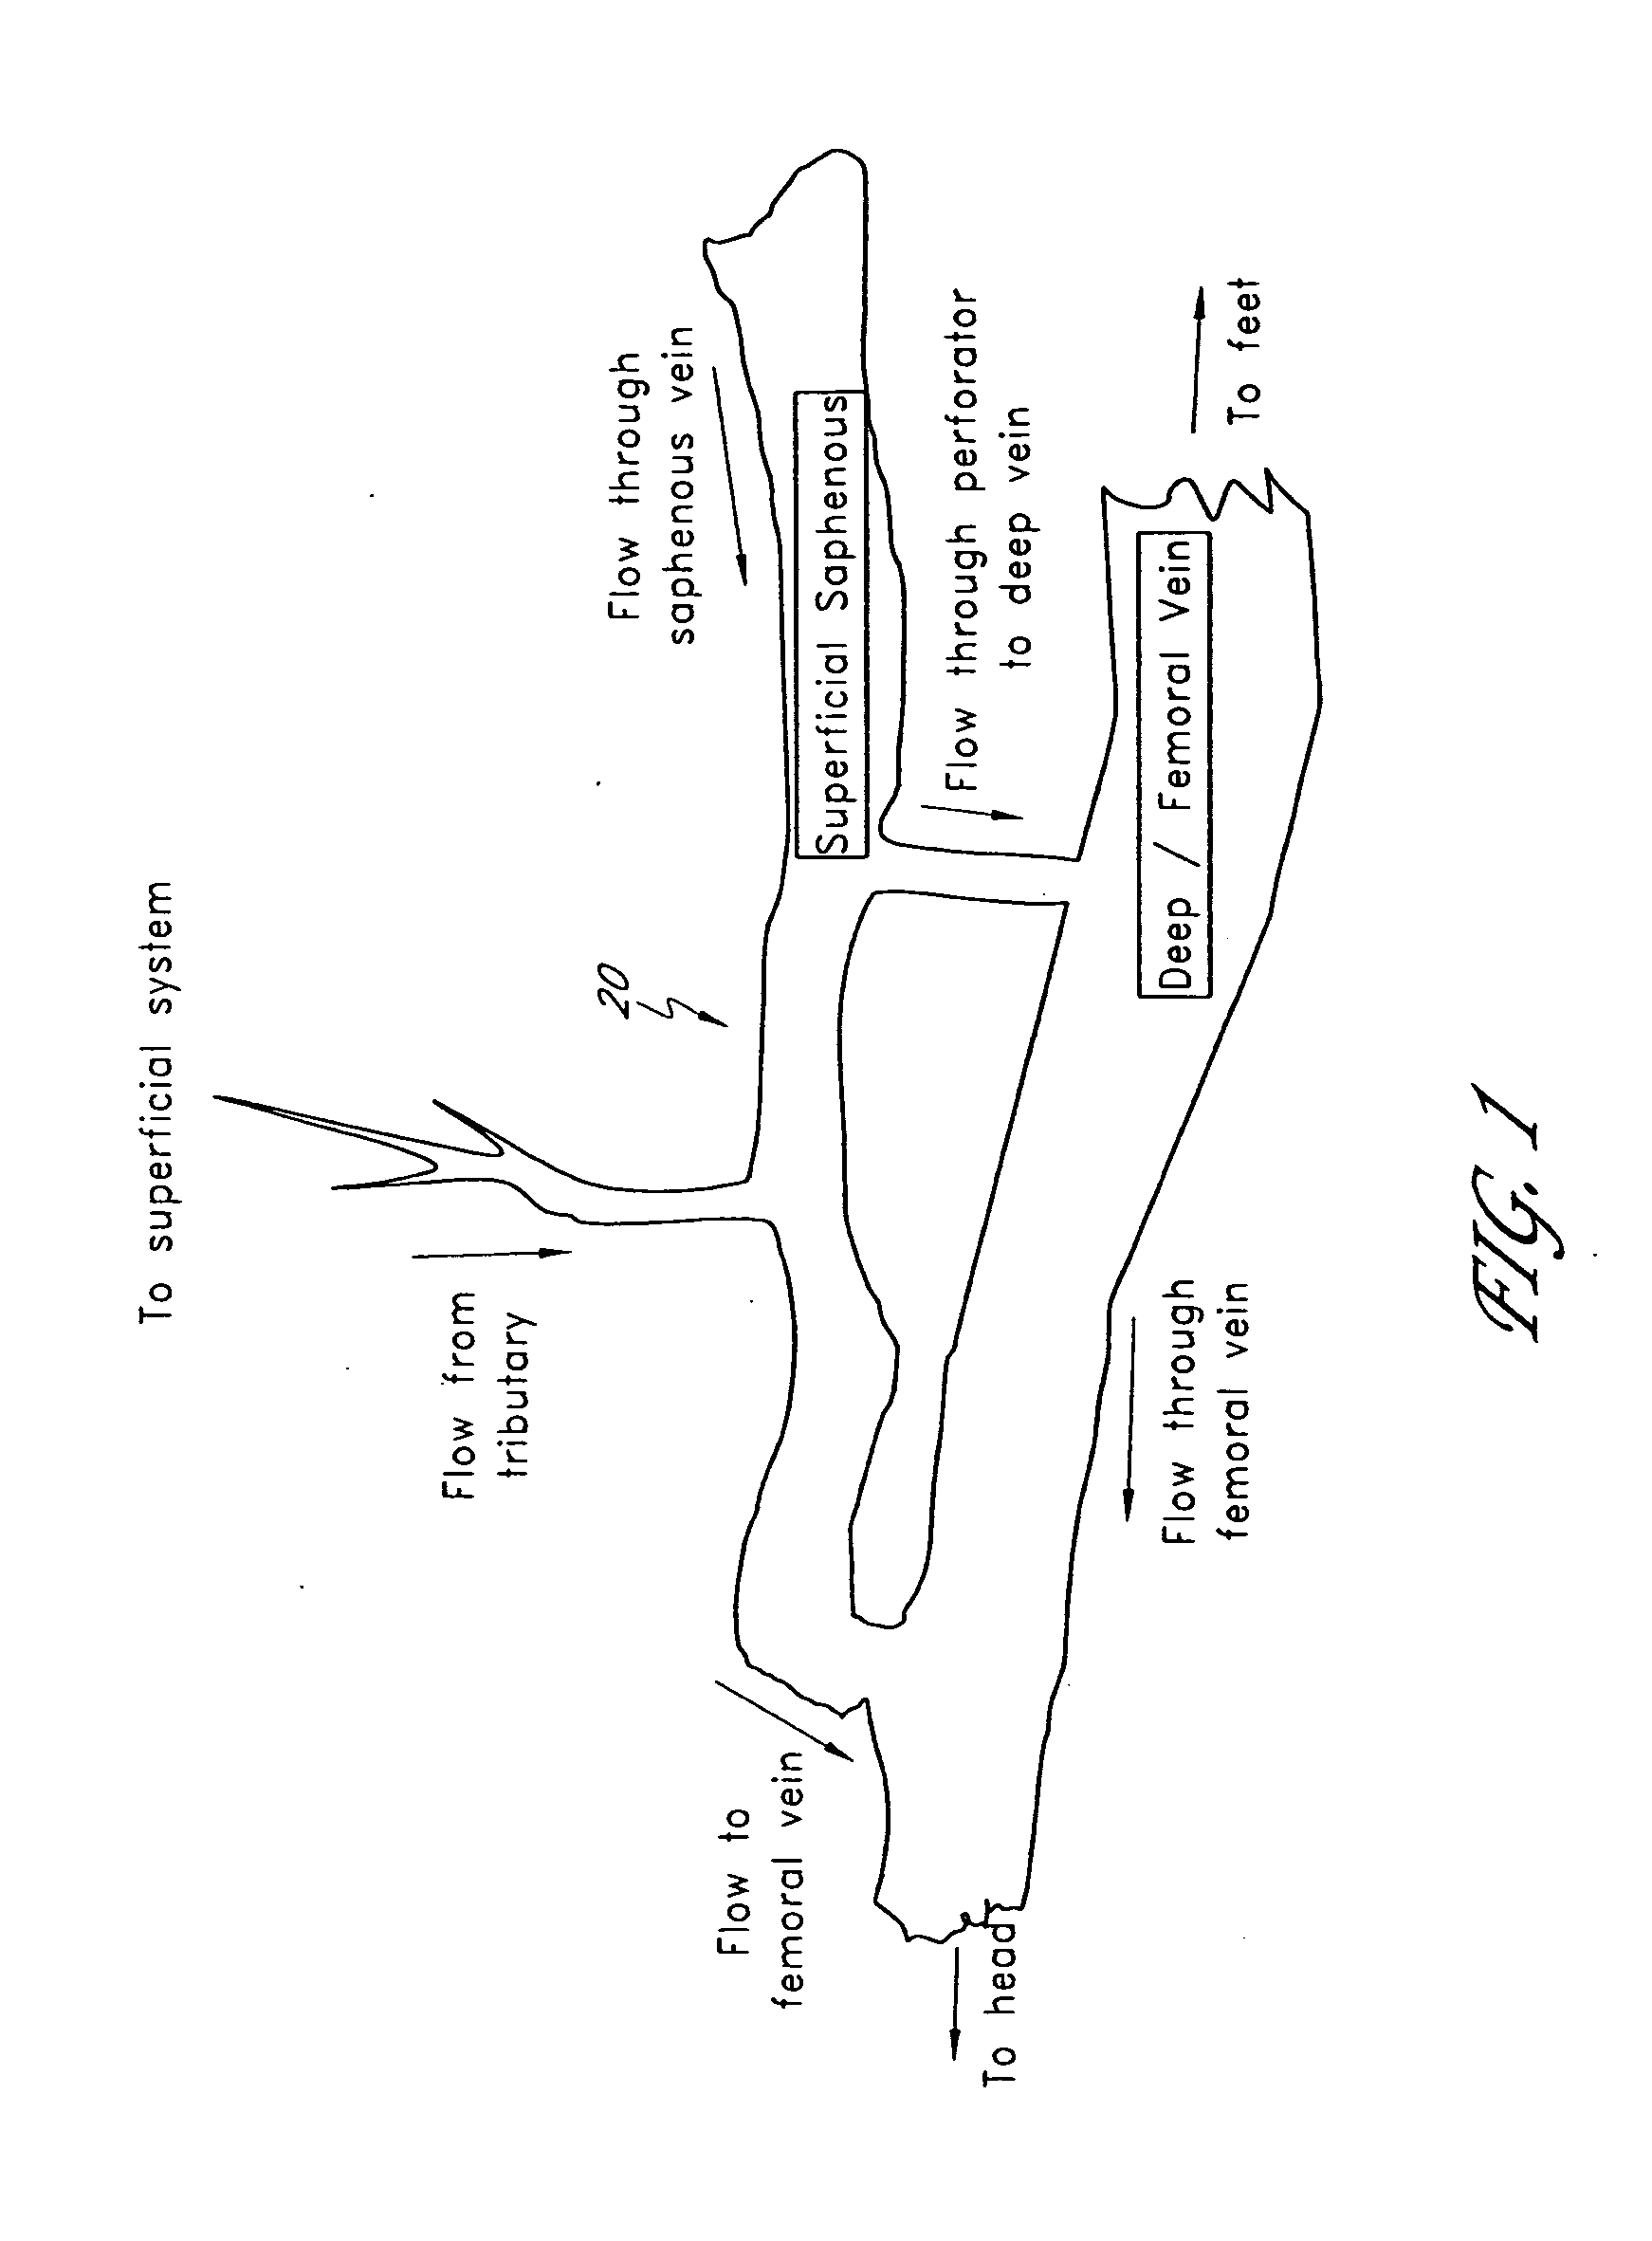 Occlusive implant and methods for hollow anatomical structure